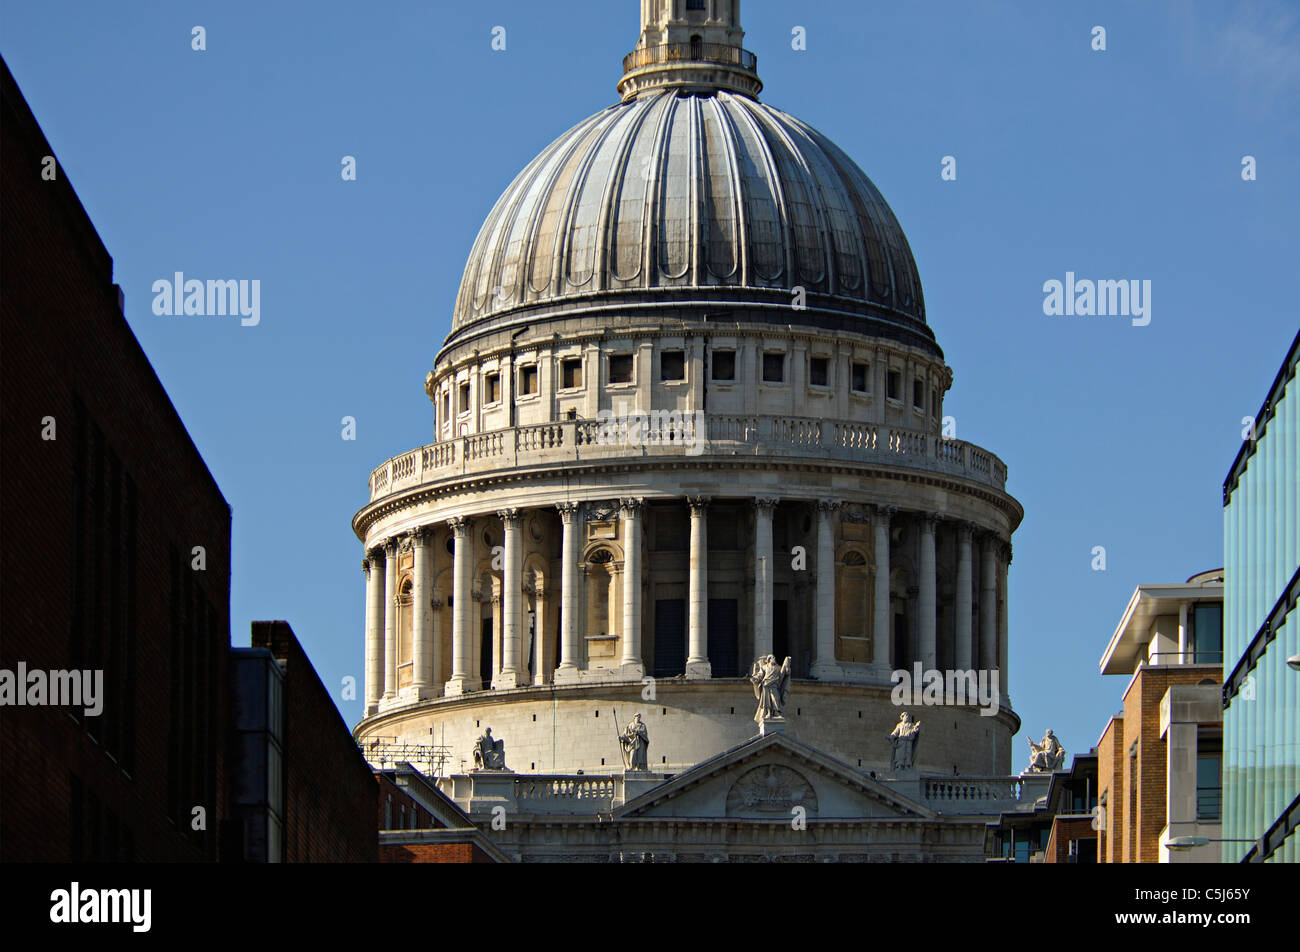 The dome of St Paul's Cathedral under a blue summer sky, London UK. Stock Photo